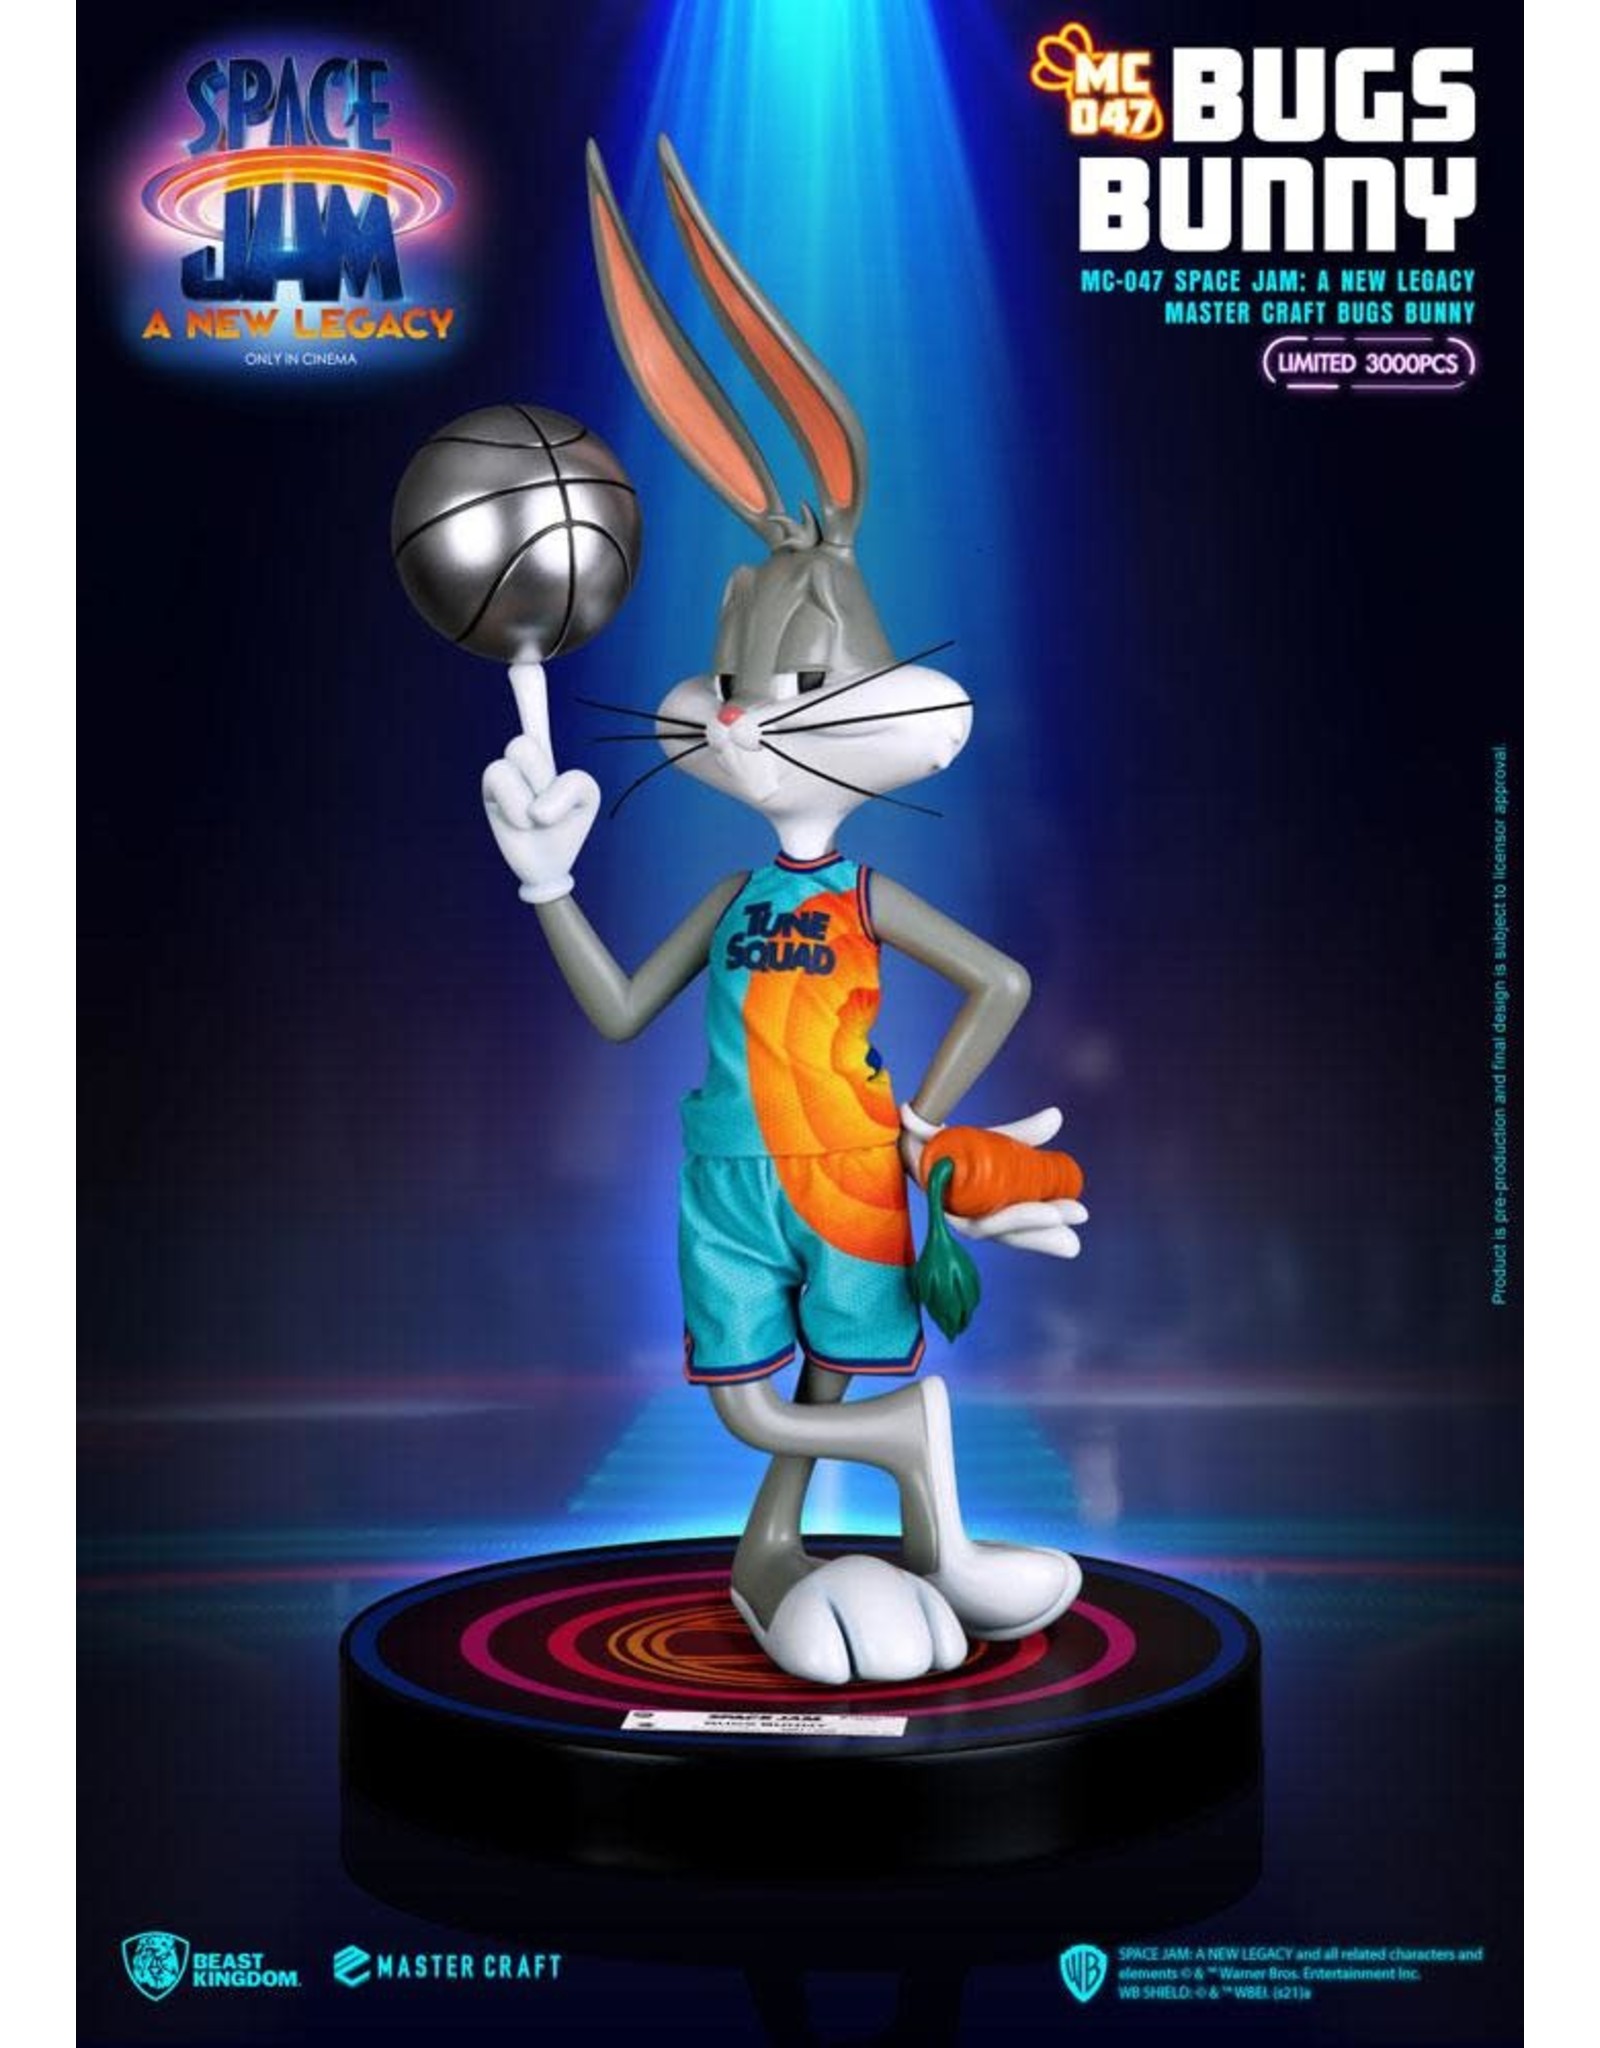 Beast Kingdom SPACE JAM A New Legacy Statue Master Craft 43cm - Bugs Bunny